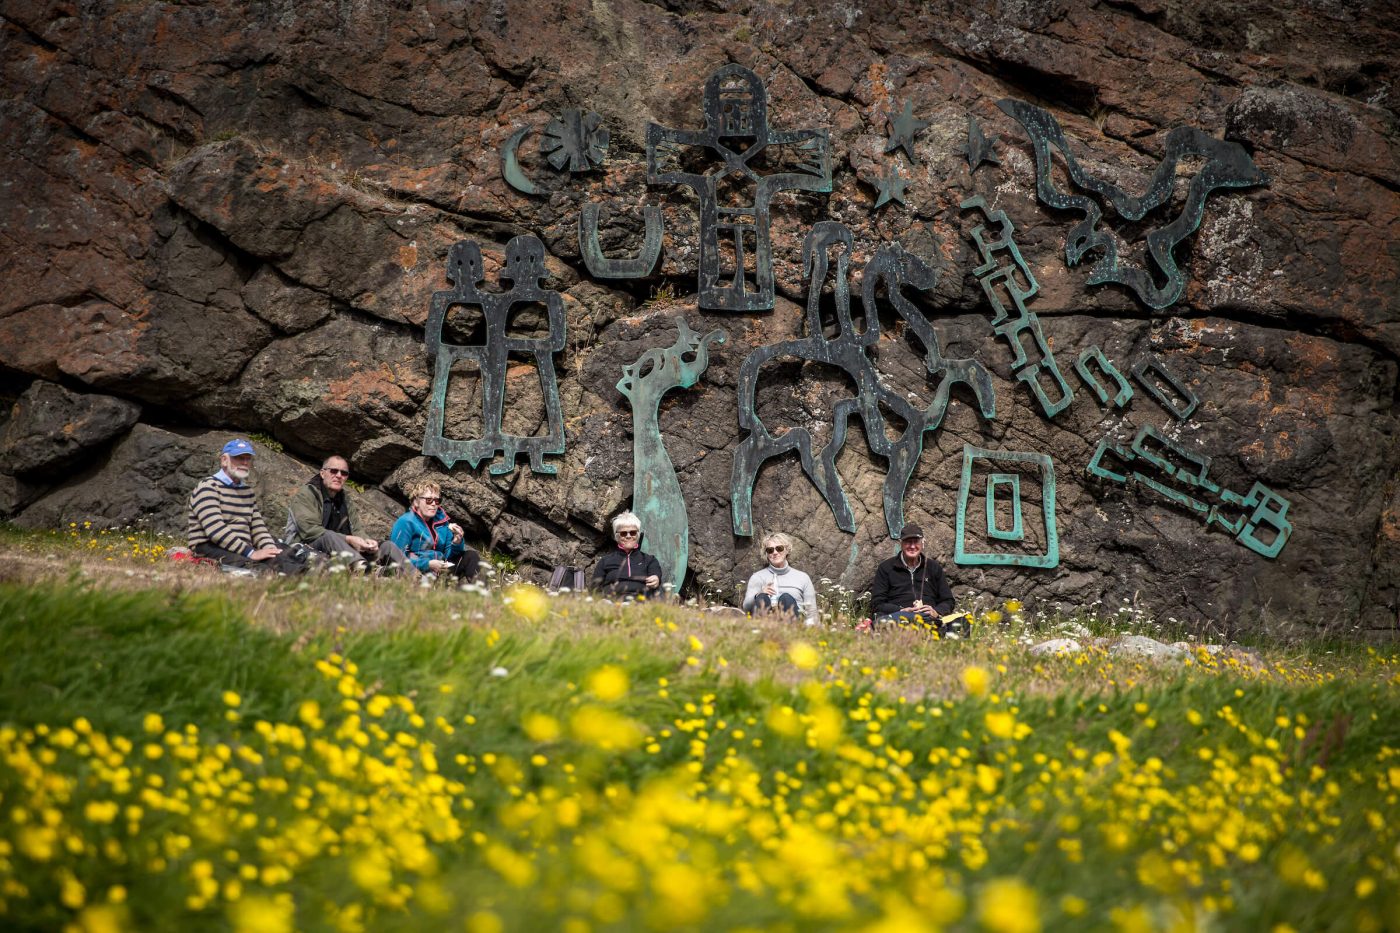 A group of travelers having lunch in front of the Sven Havsteen Mikkelsen artwork in Qassiarsuk. By Mads Pihl